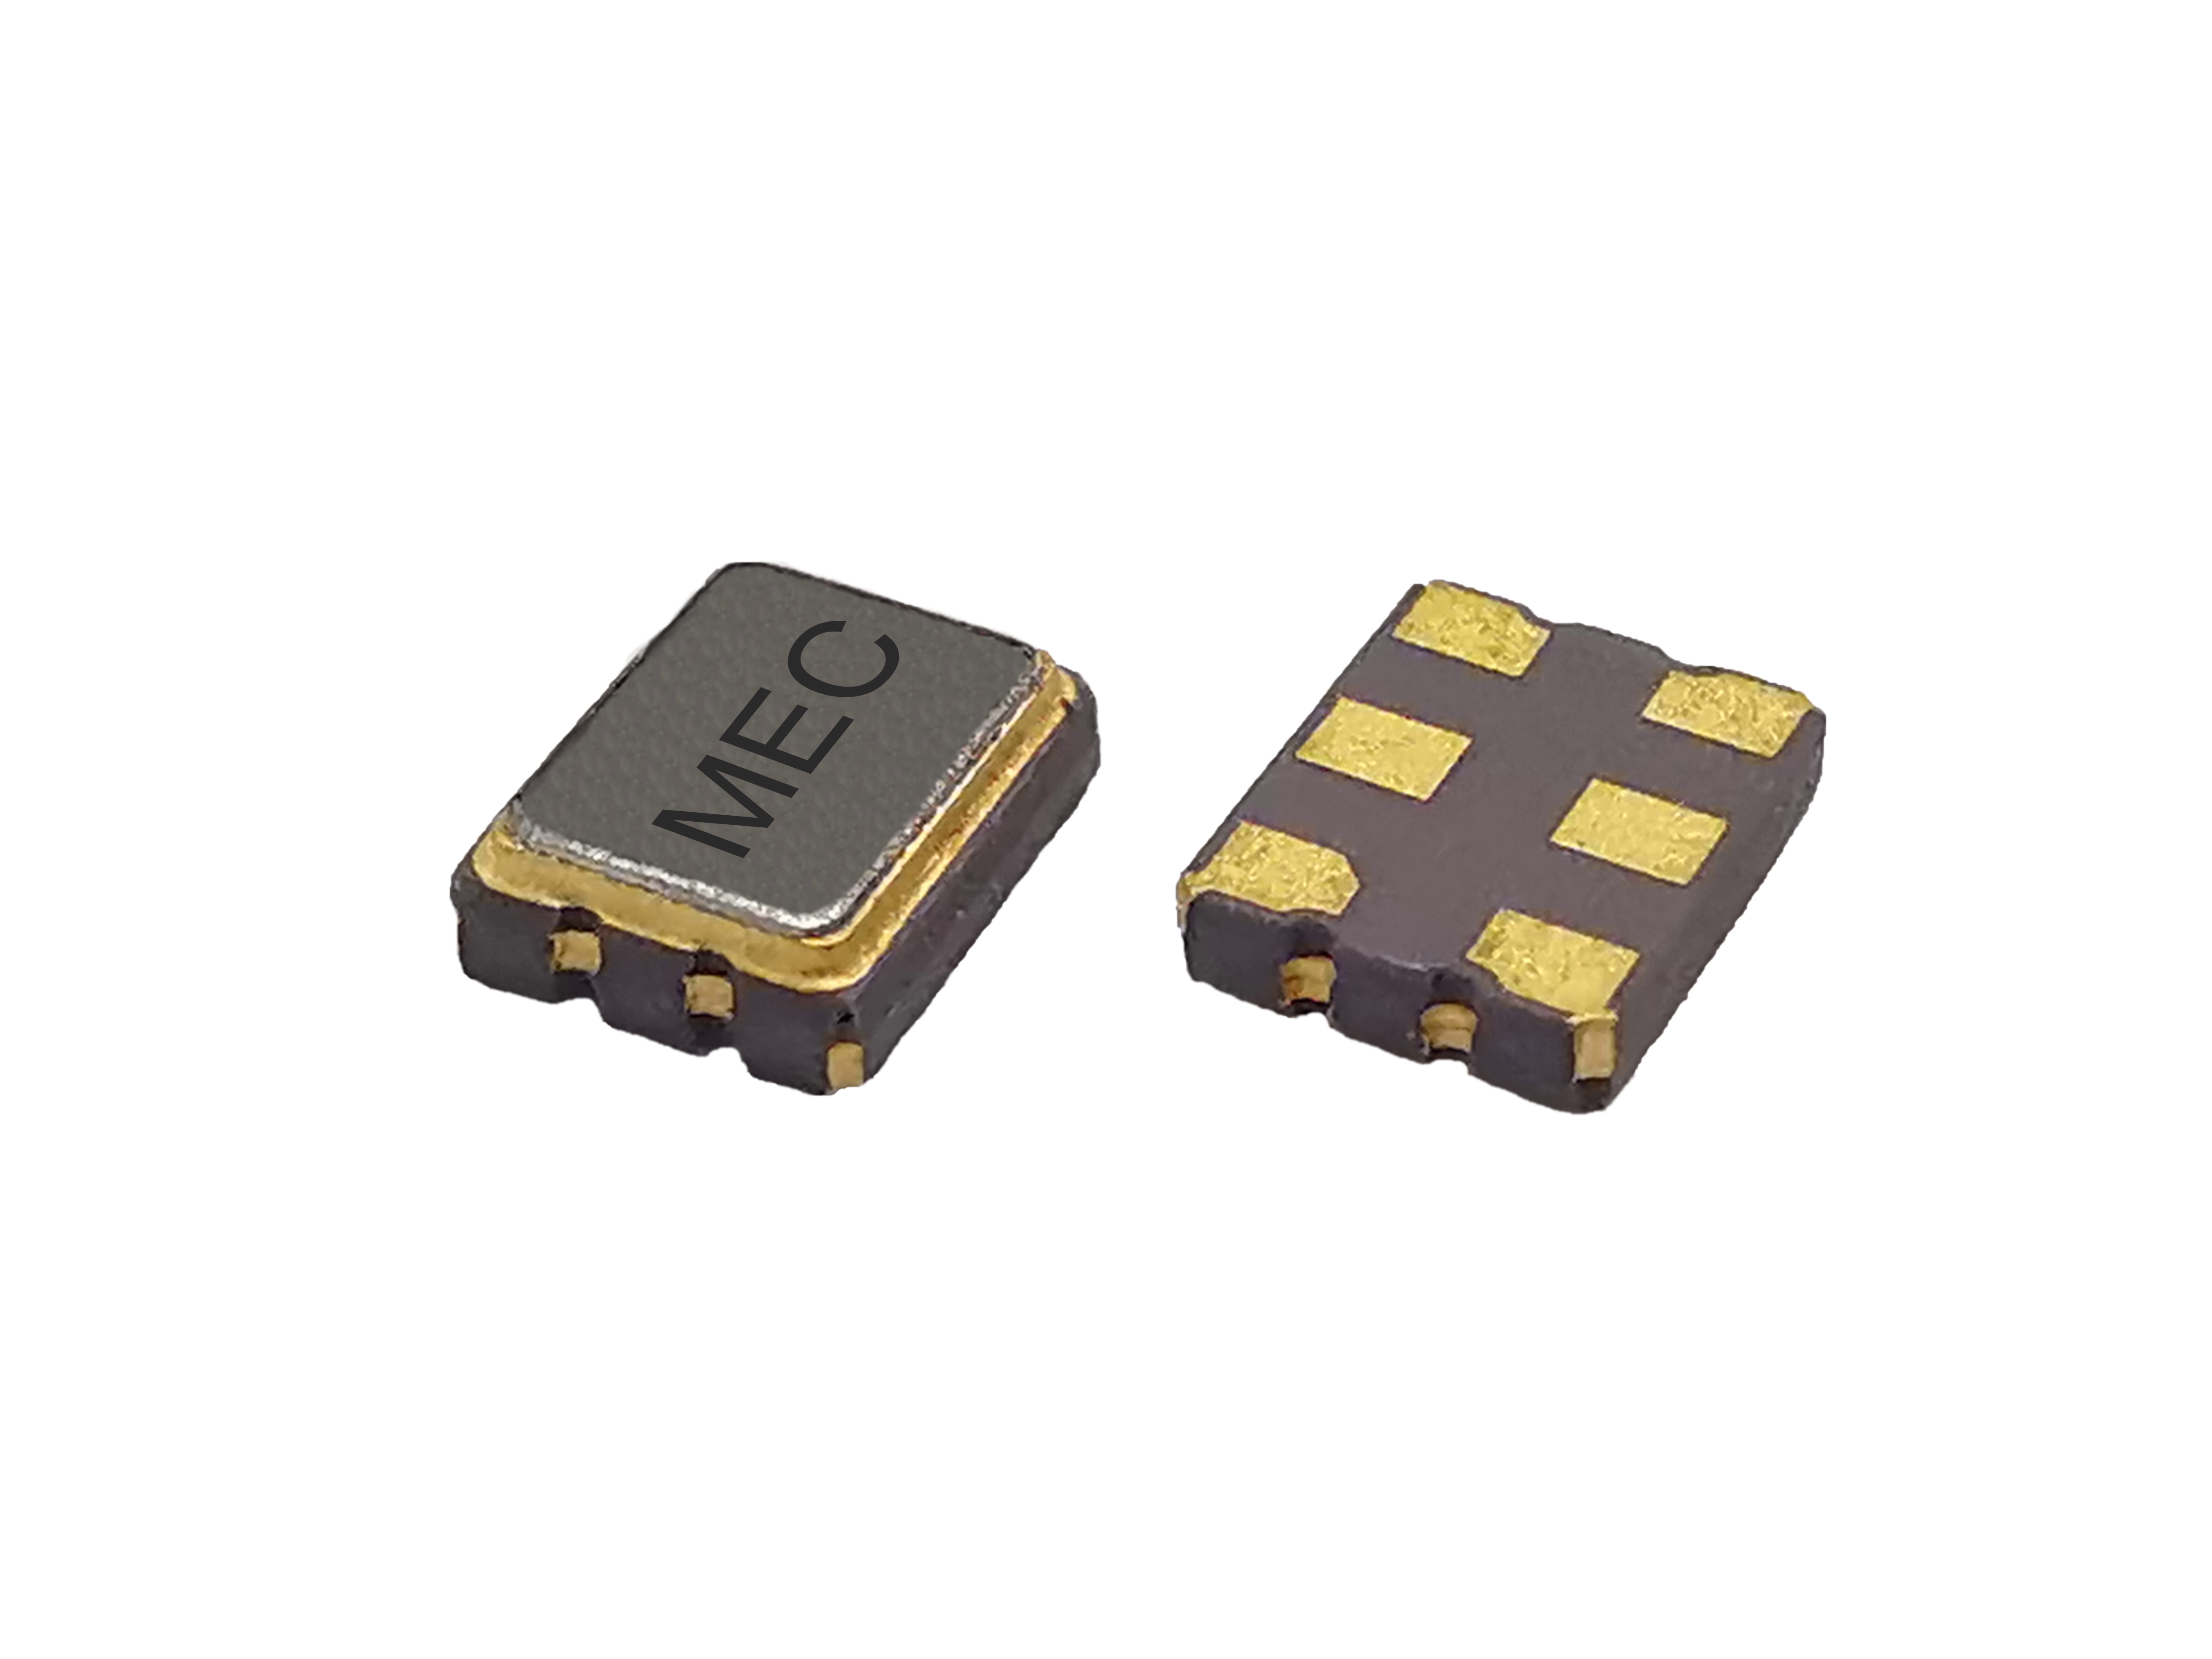 HCEK326 3225 2.5V Superb Phase Noise Differential With No PLL HCSL SMD Crystal Oscillator